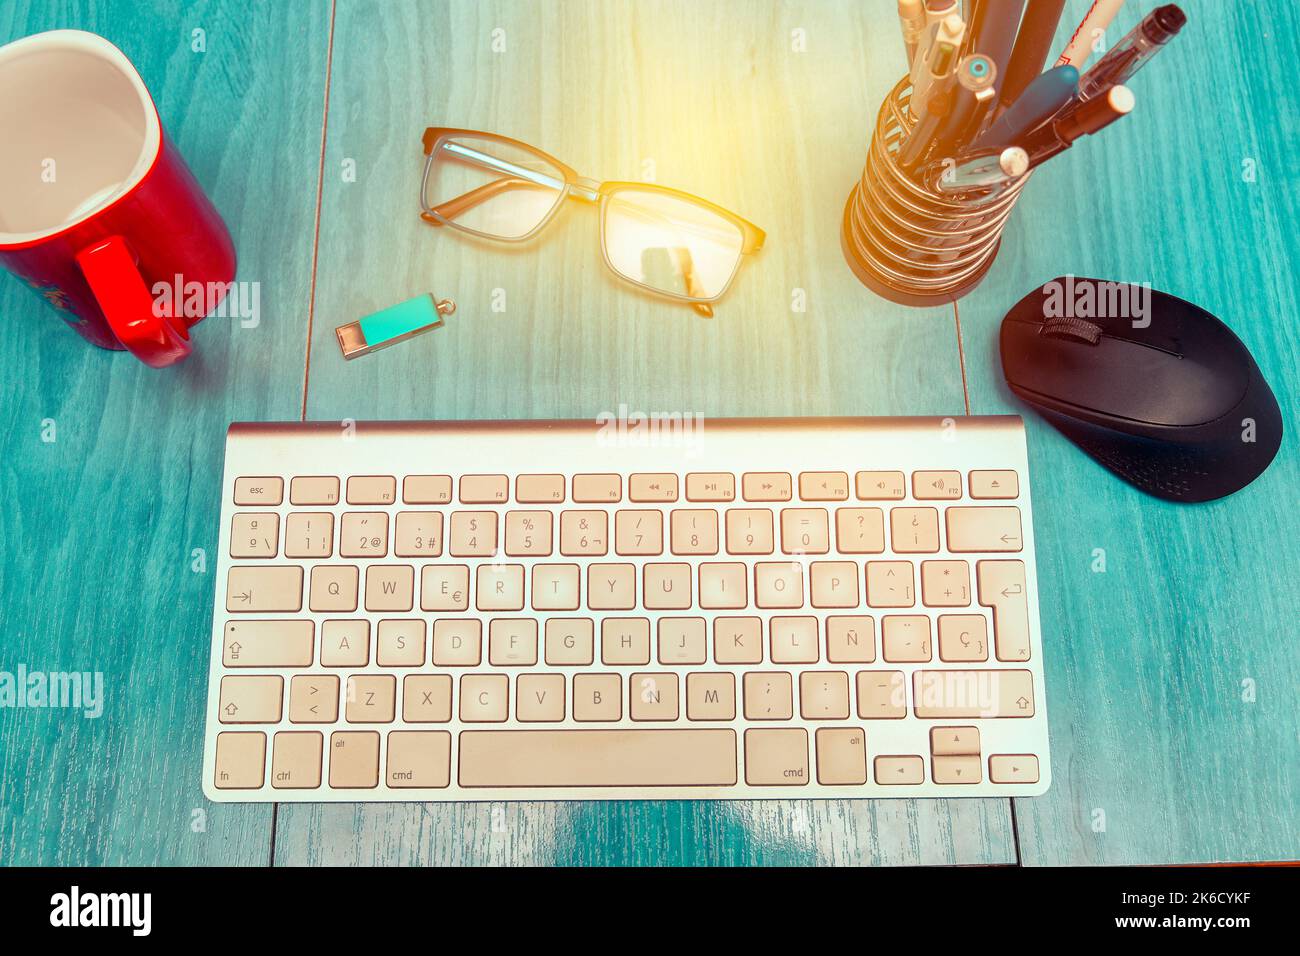 concept of teleworking from home with desktop with a keyboard, mouse and and other work tools Stock Photo